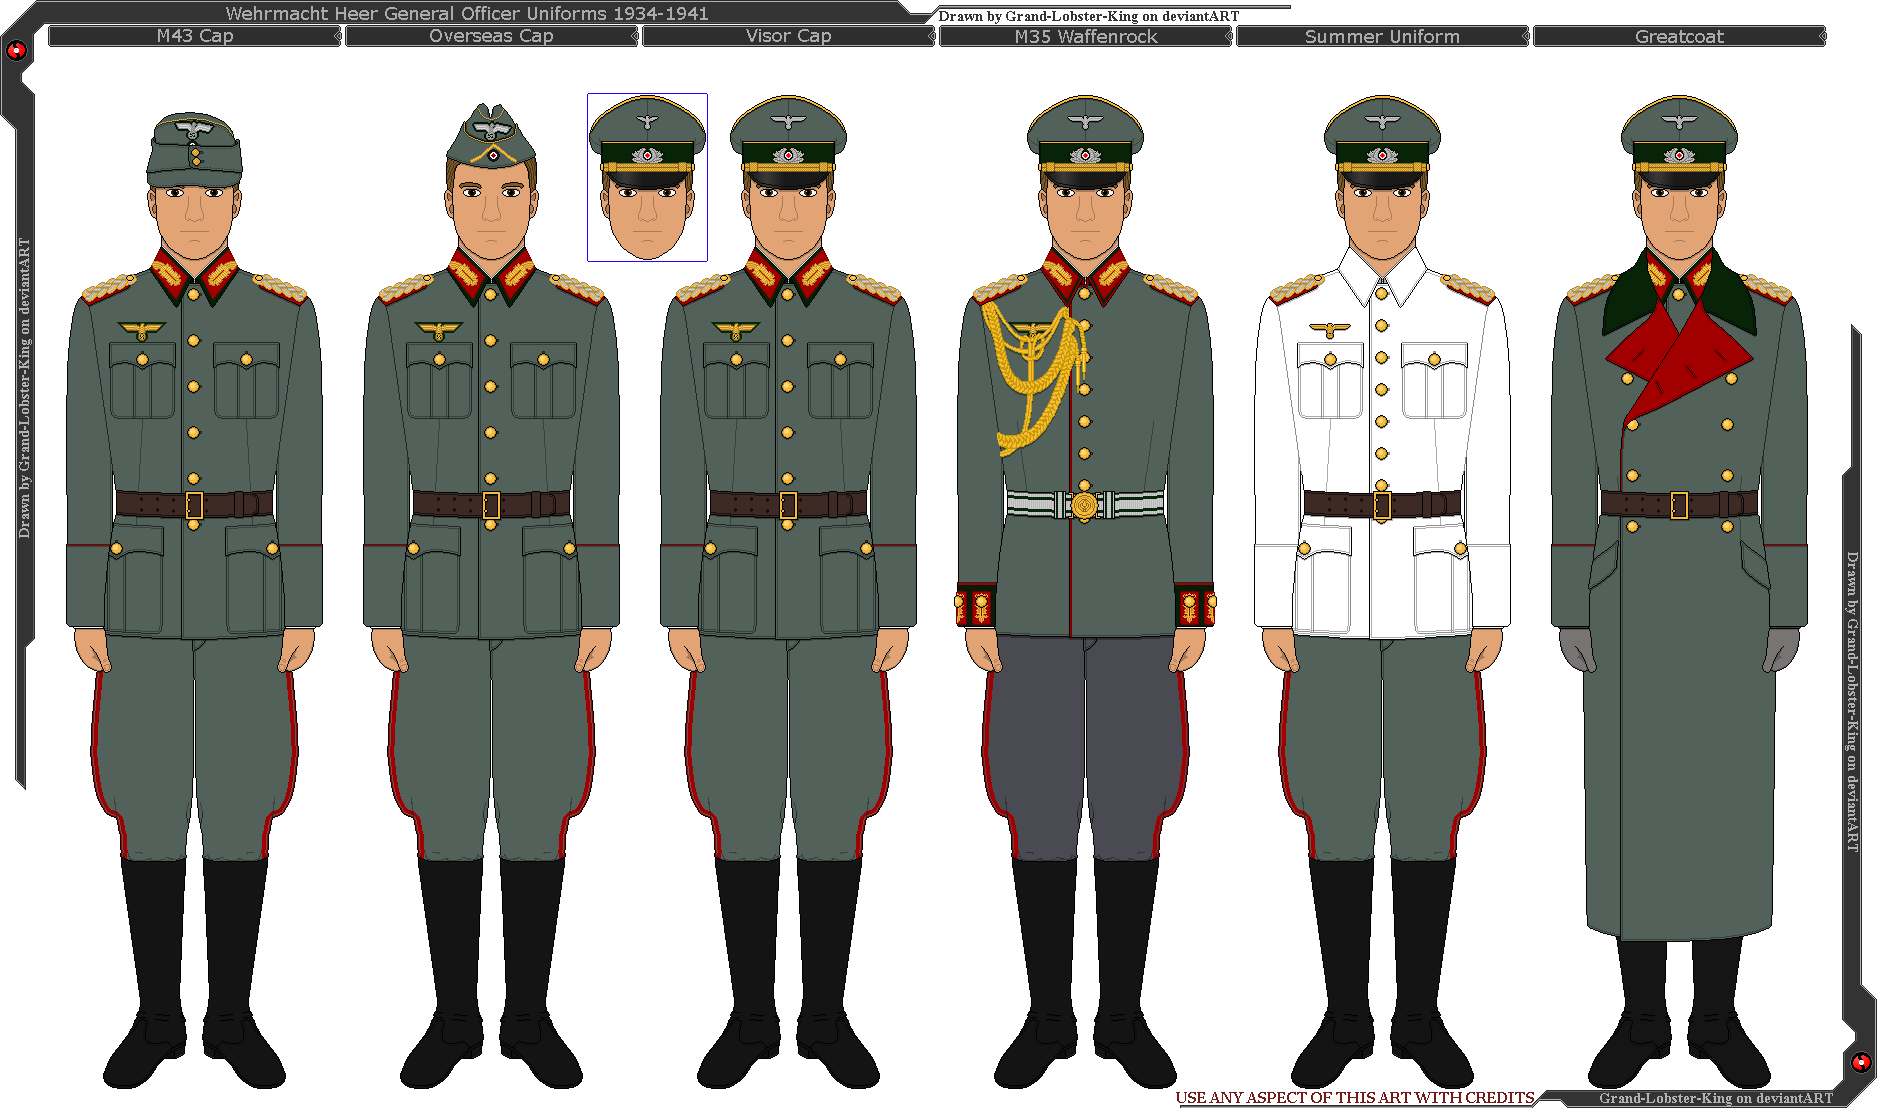 Wehrmacht Heer General Uniforms 1934-1941 by Grand-Lobster-King on